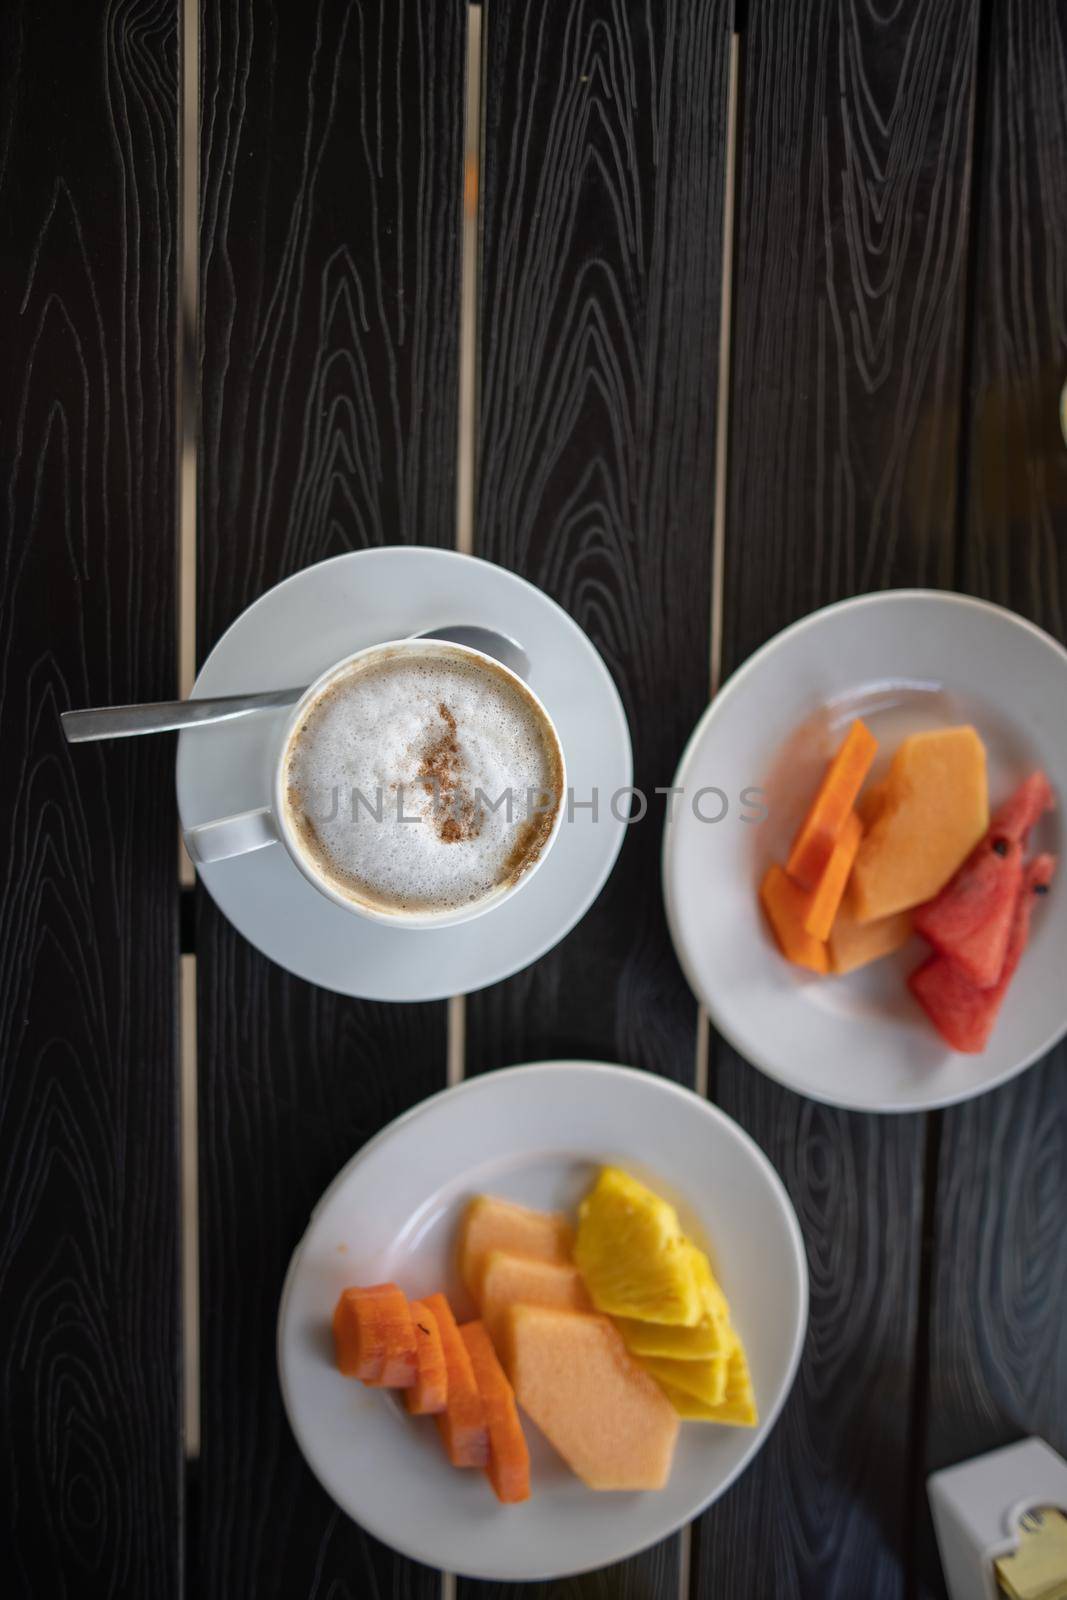 Top view of delicious cup of coffee latte, sliced fruit for breakfast on black table. Tasty hot drink and pineapple, melon, and papaya slices on white crockery above dark wooden surface. Balanced diet